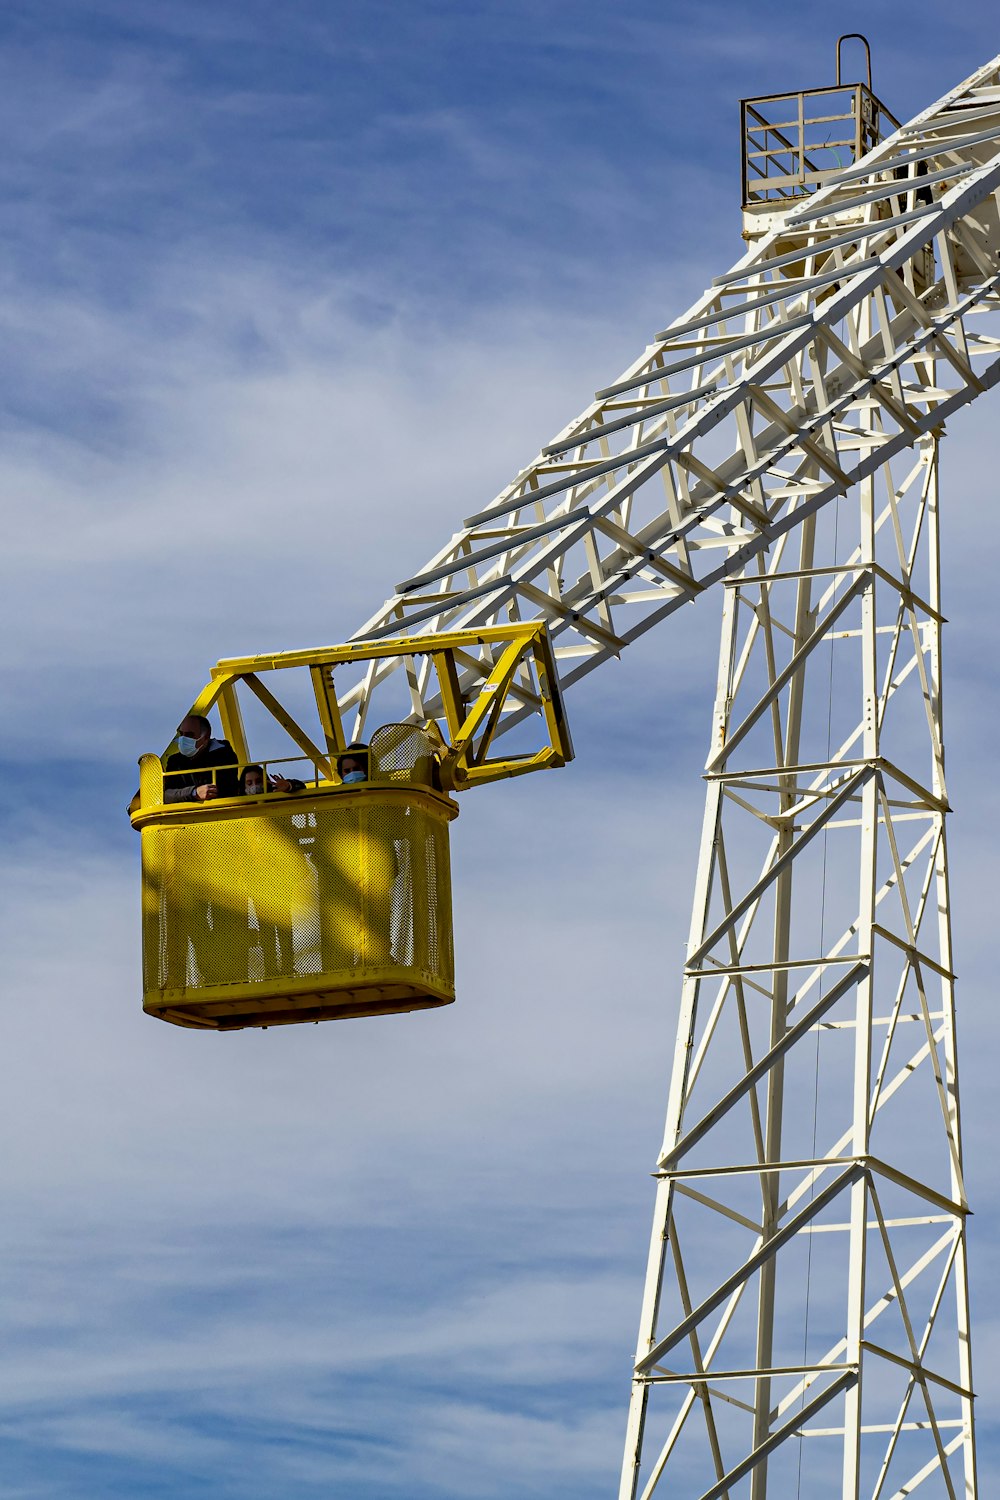 a yellow lift is attached to a tall tower